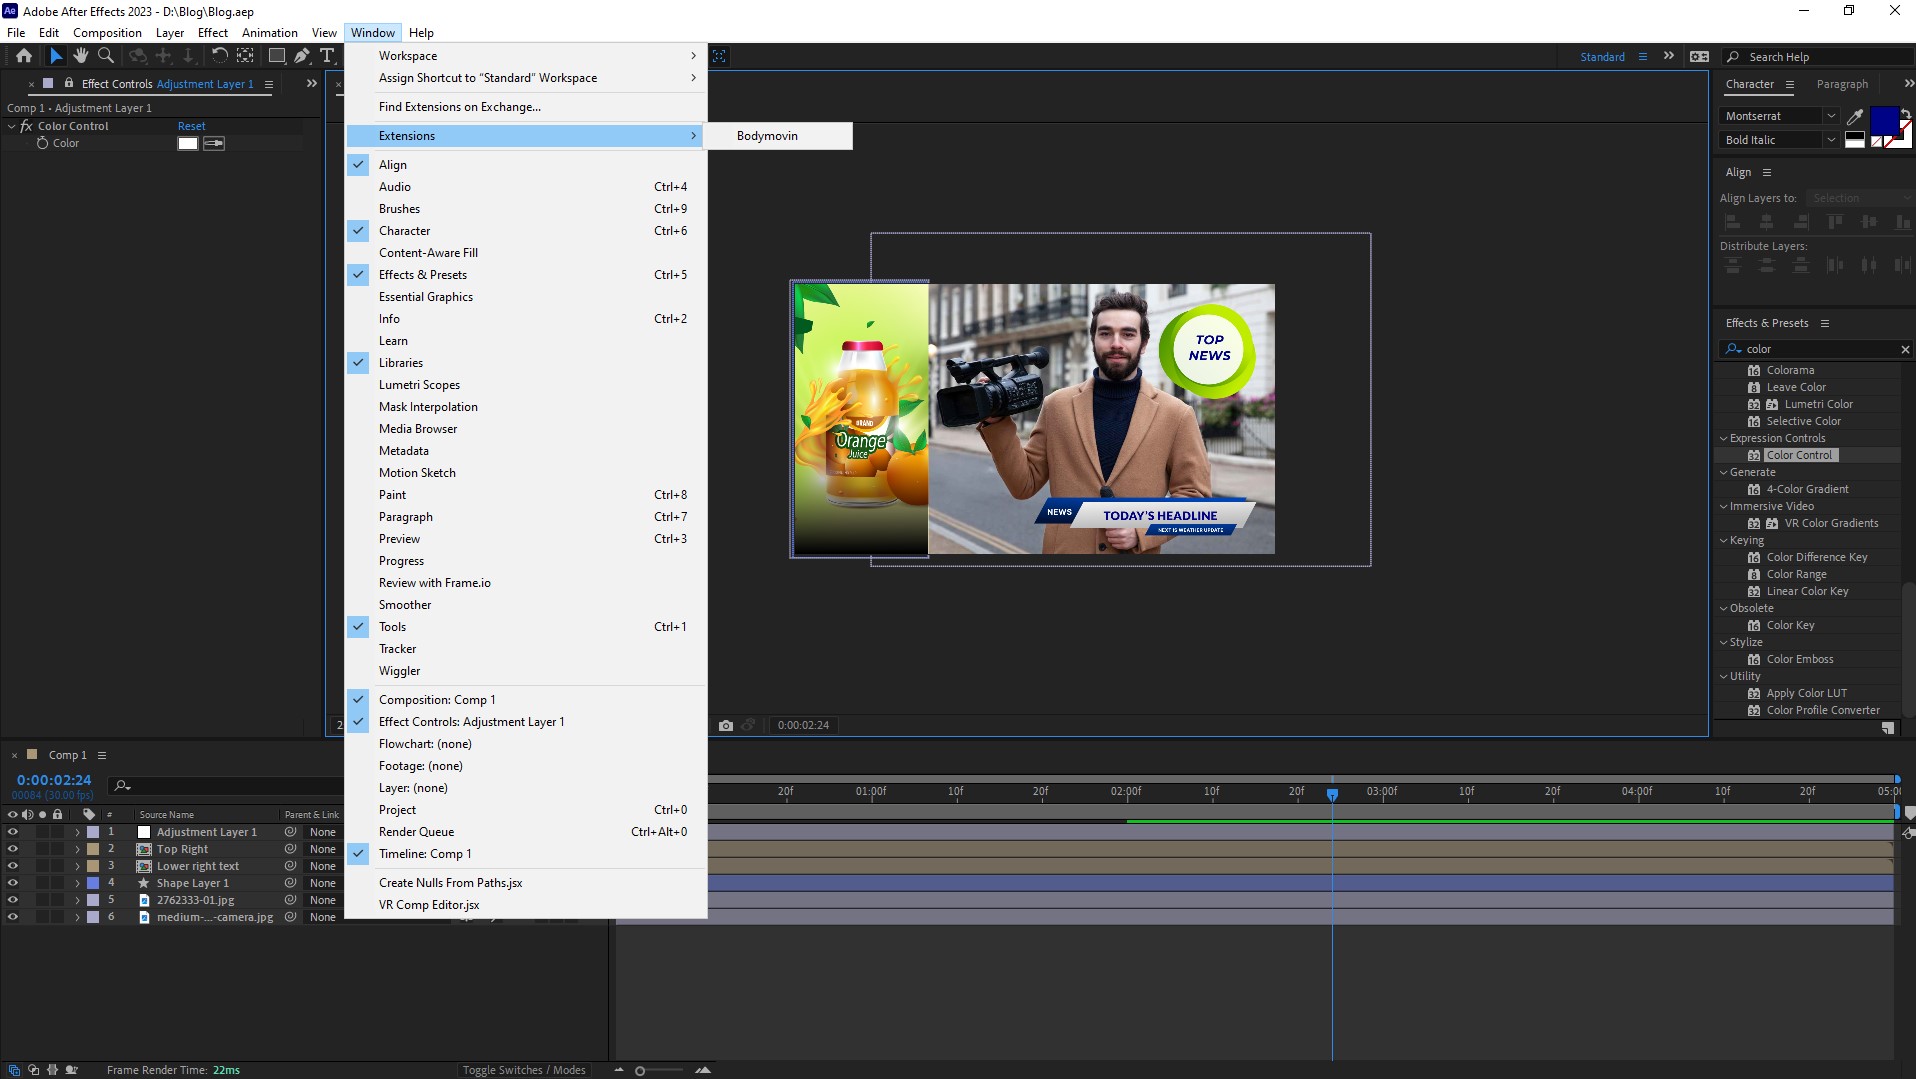 Screenshot of Adobe After Effects application with menu settings.